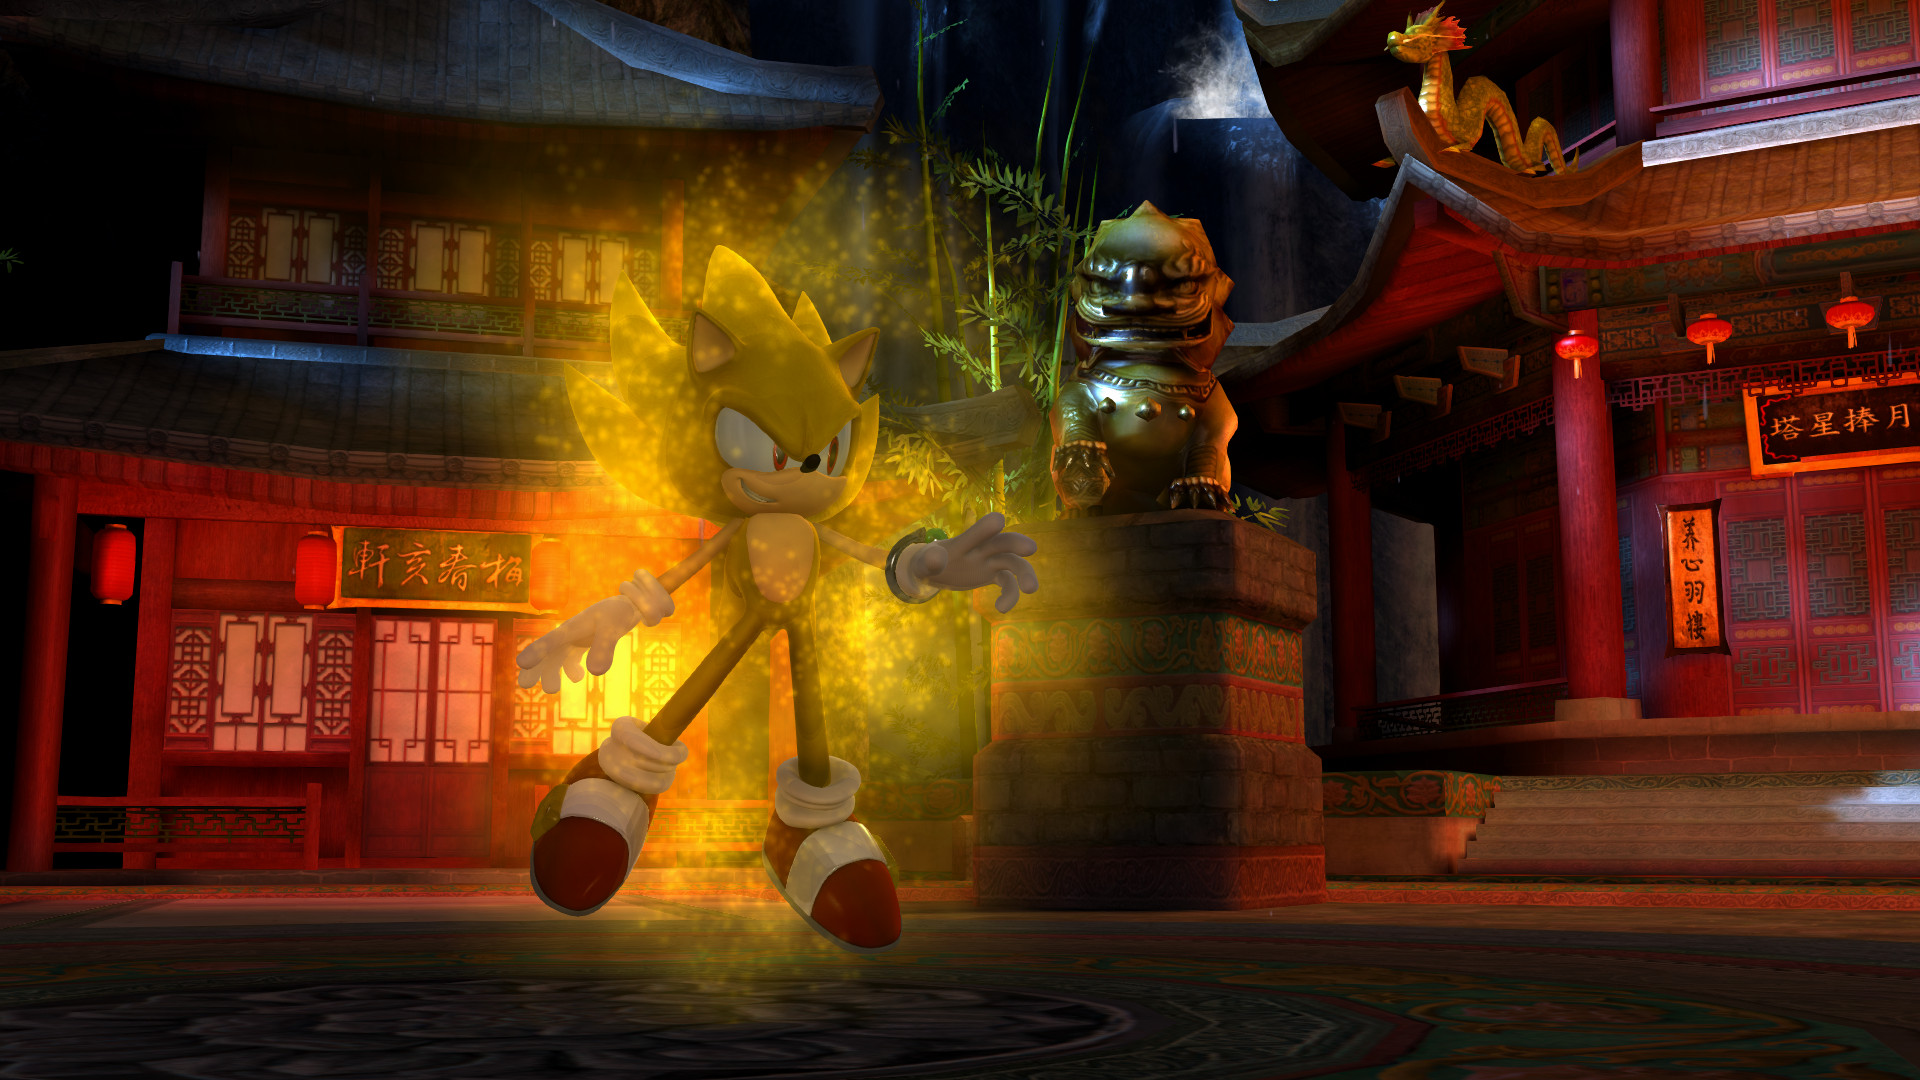 Sonic Generations: Redux on X: Bless your timeline with Pure SU